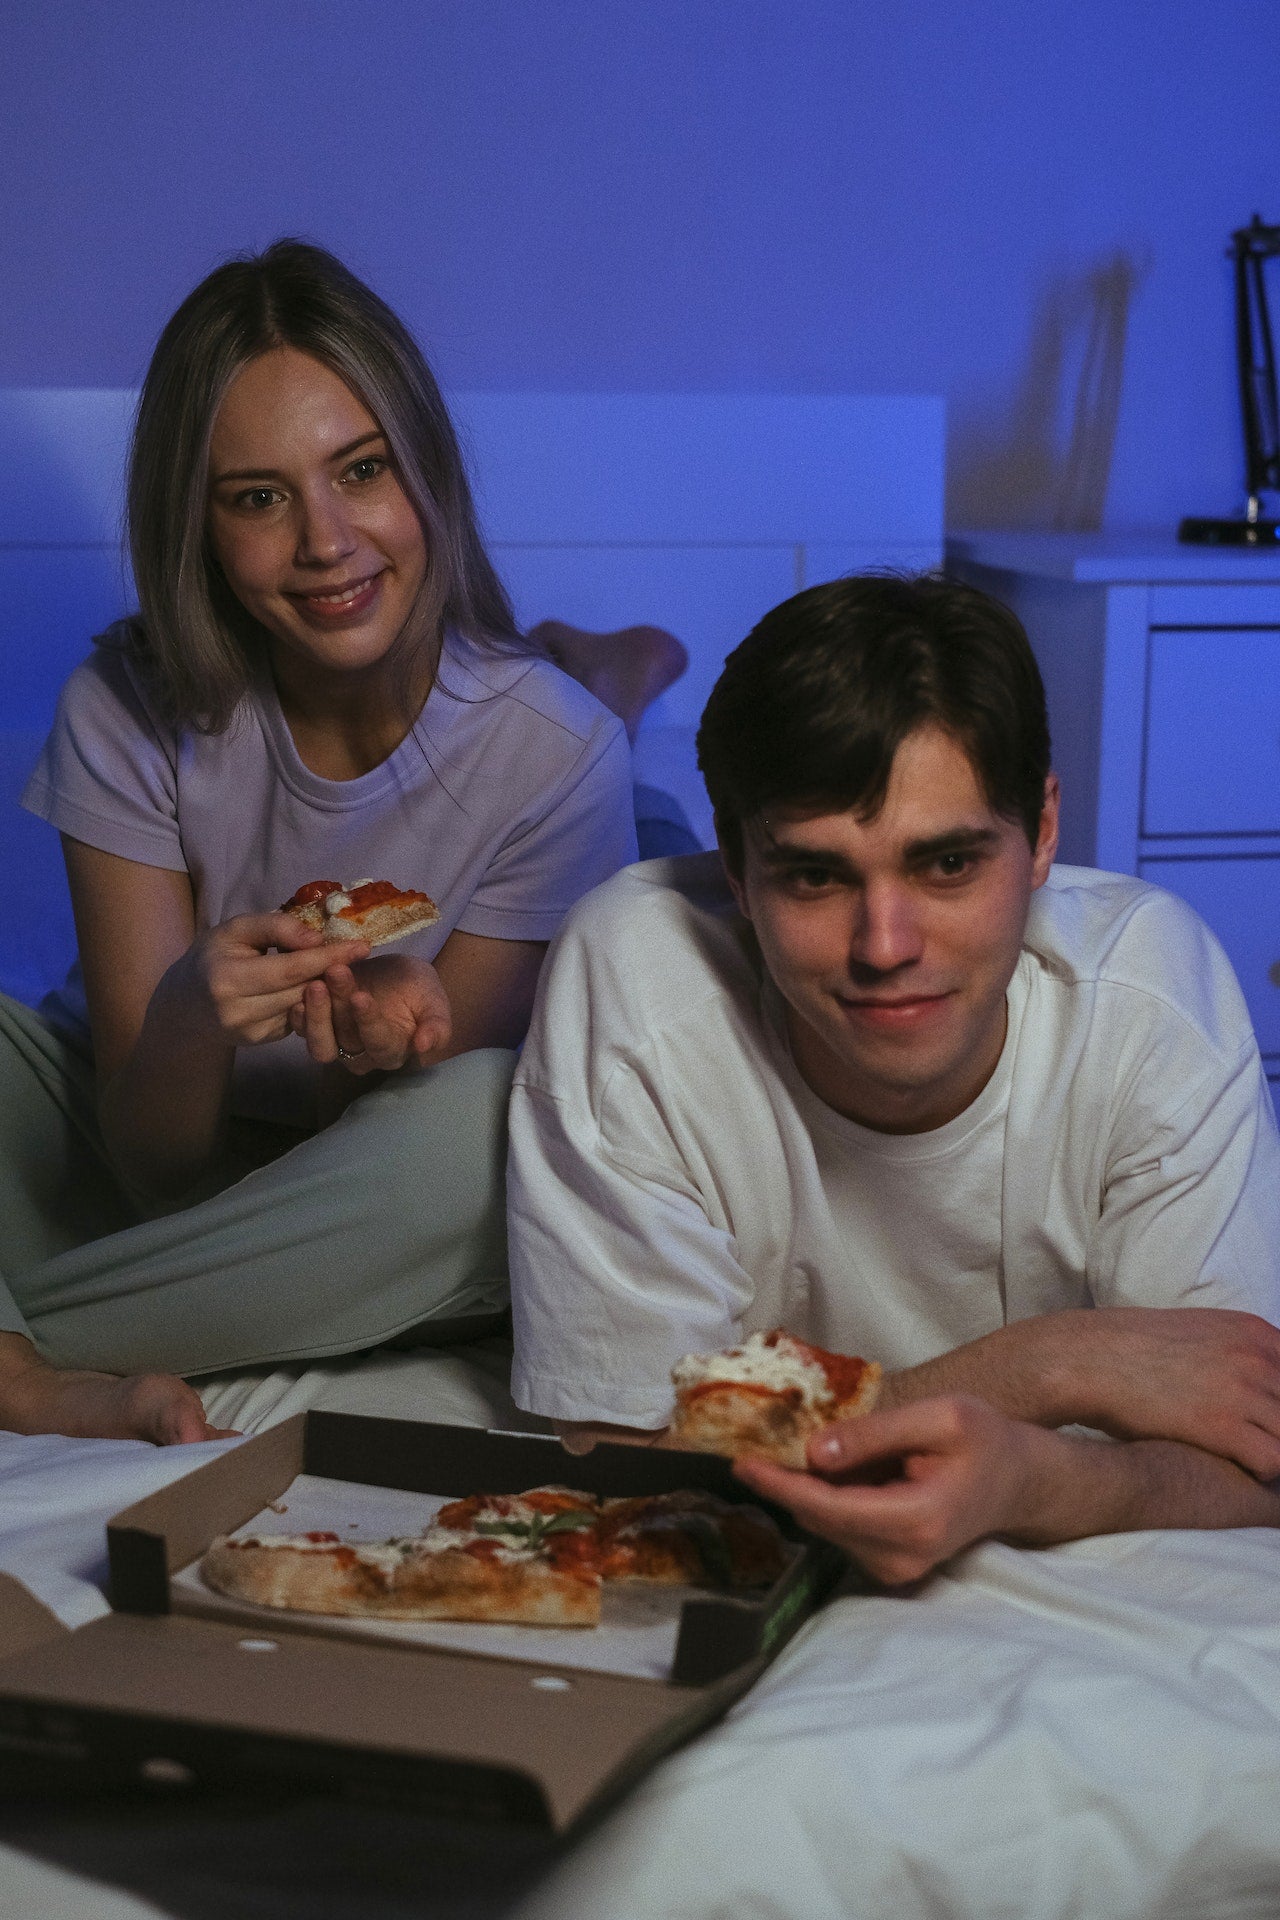 A Couple Eating Pizza while on the Bed